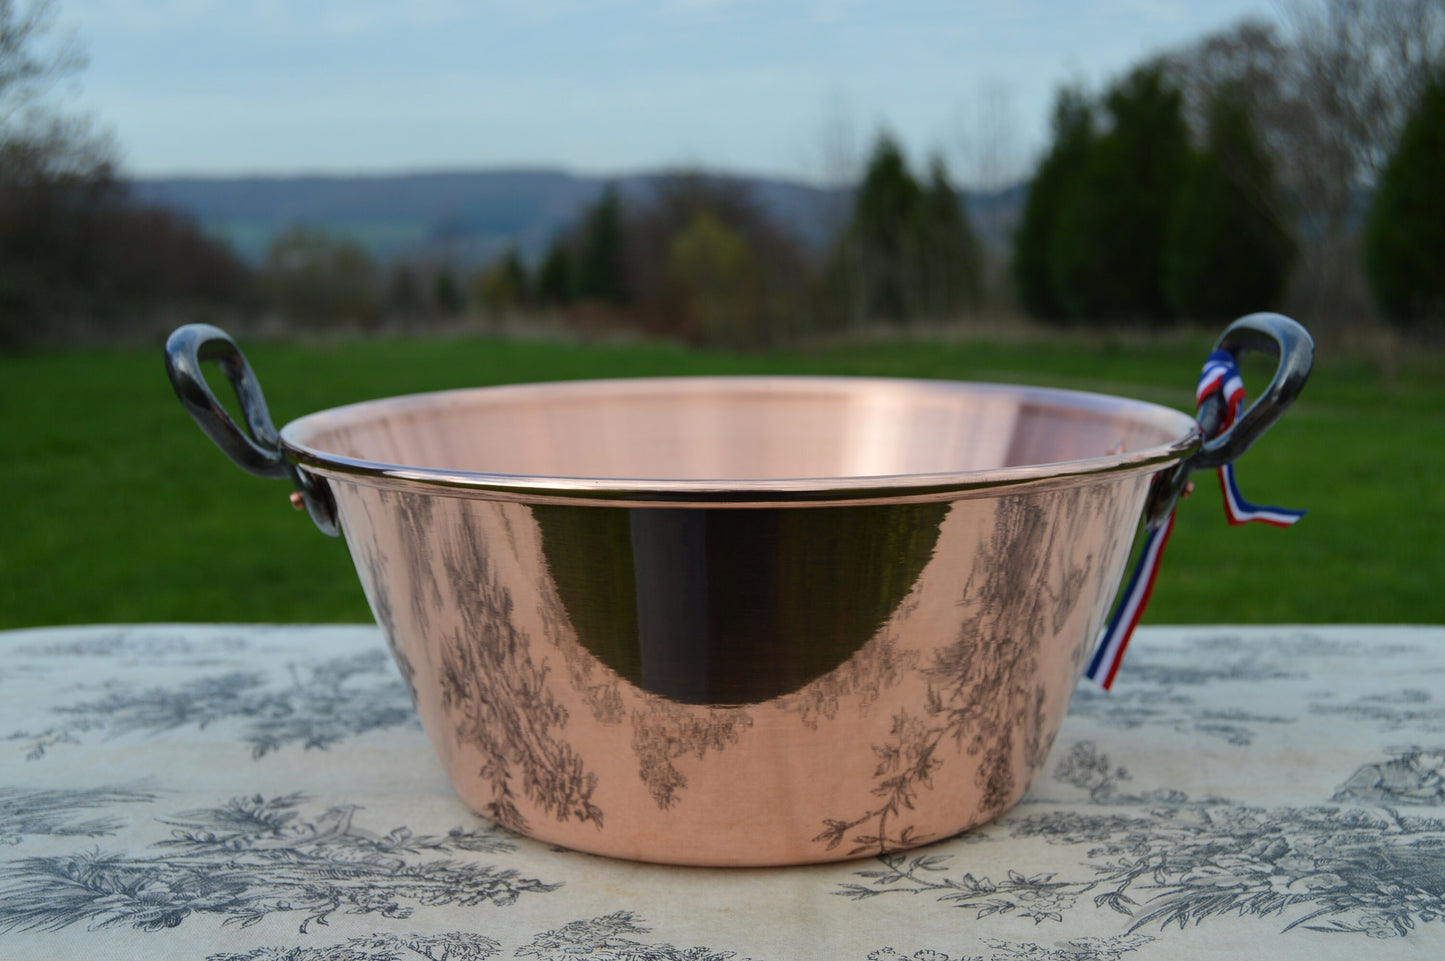 New NKC 28 cm Copper Jam Pan from Normandy Kitchen Copper Jam Jelly Pan 28cm 11" Rolled Top Iron Handles New Normandy Kitchen Copper